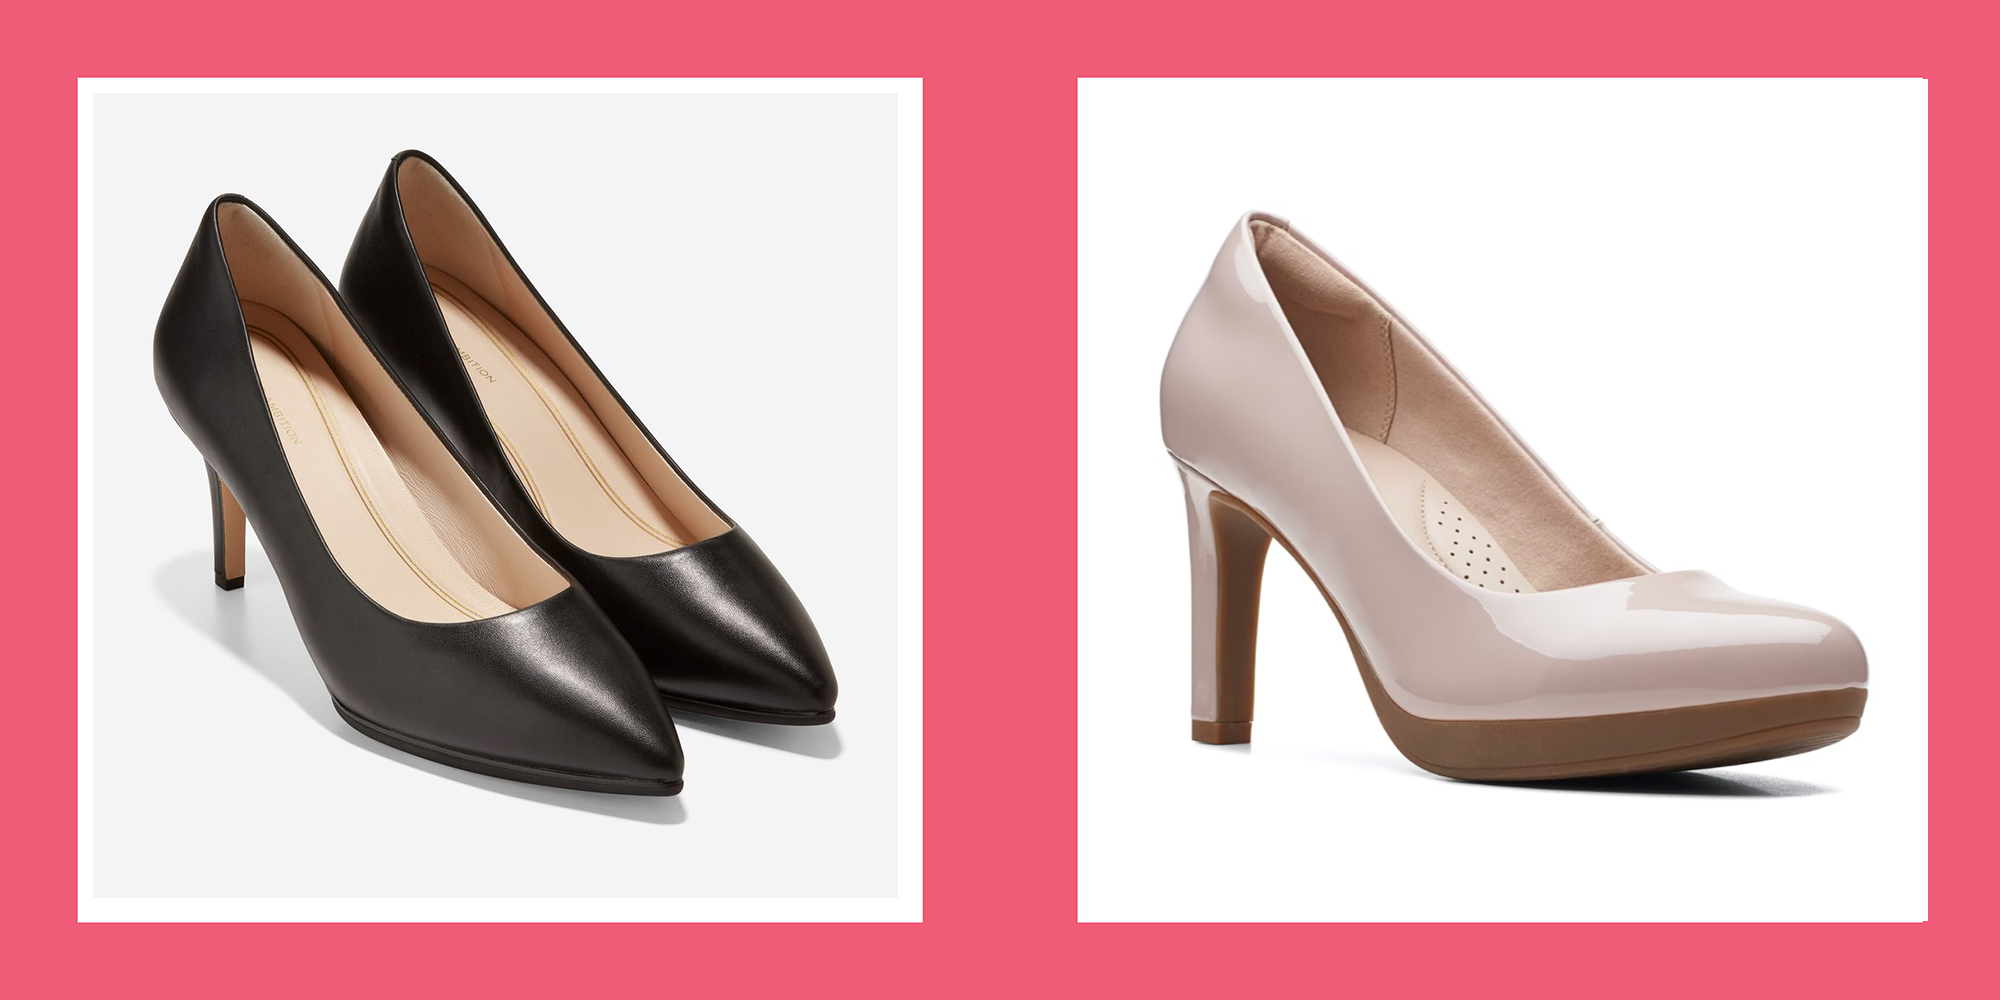 Our Top Pick for Most Comfortable Heels Is 33% Off Right Now